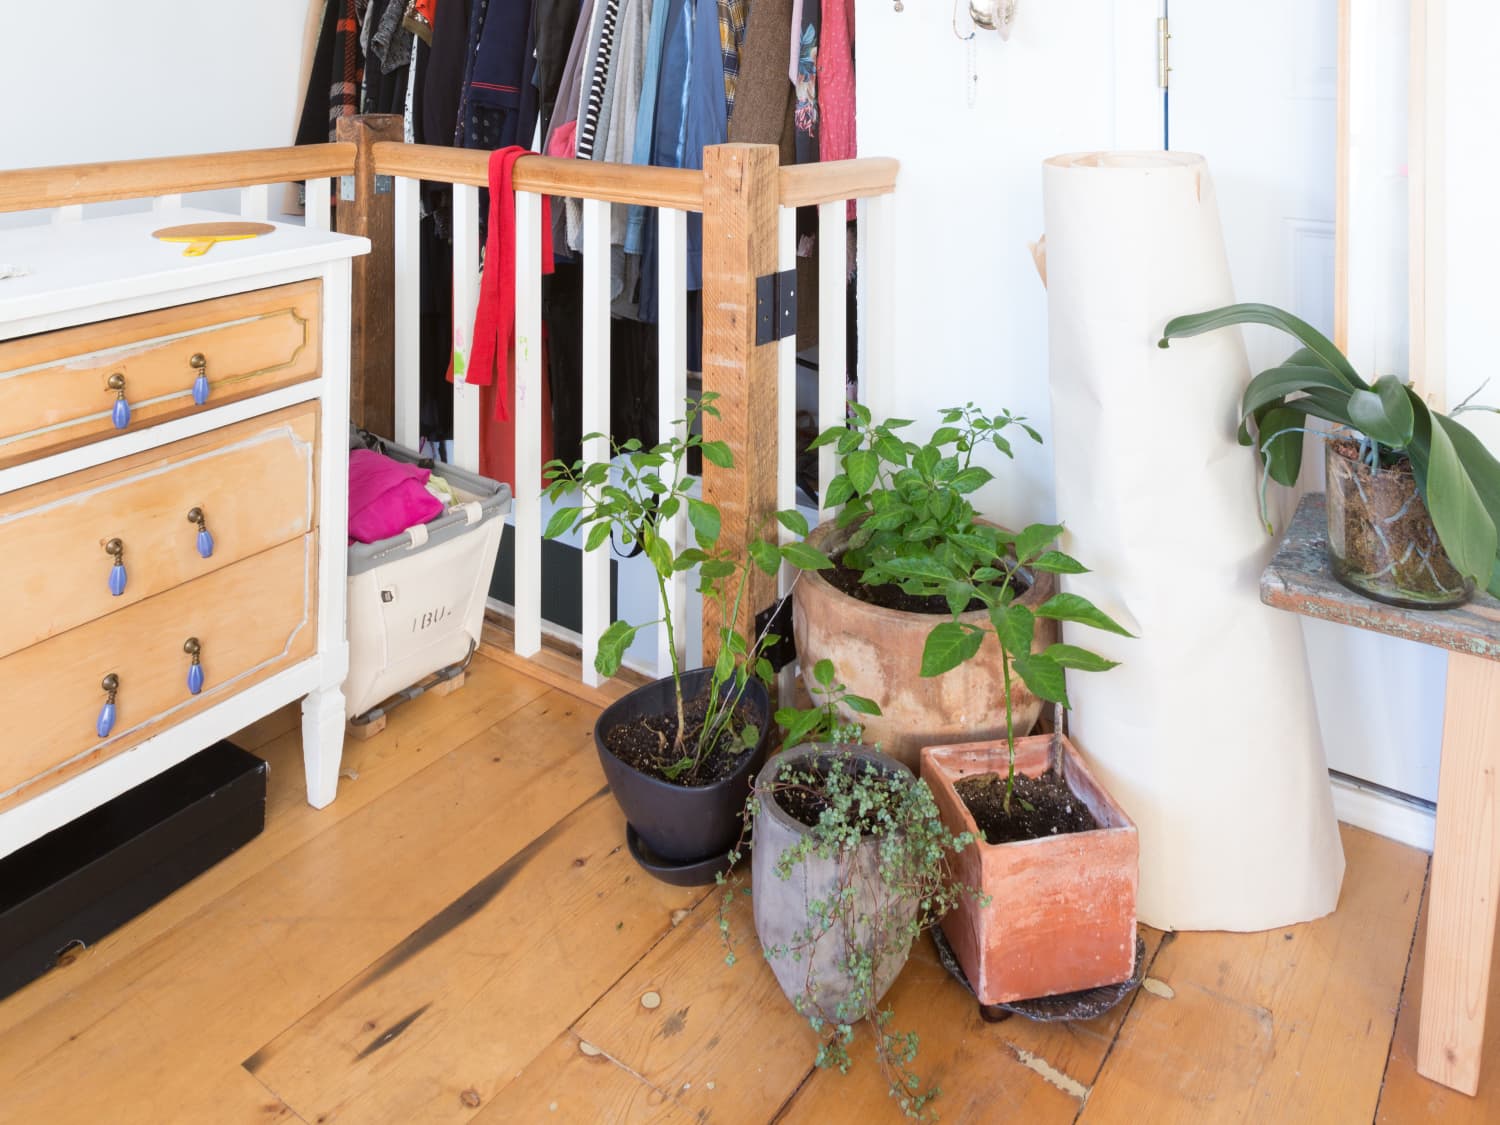 5 Proven Tips for Winter Clothes Storage